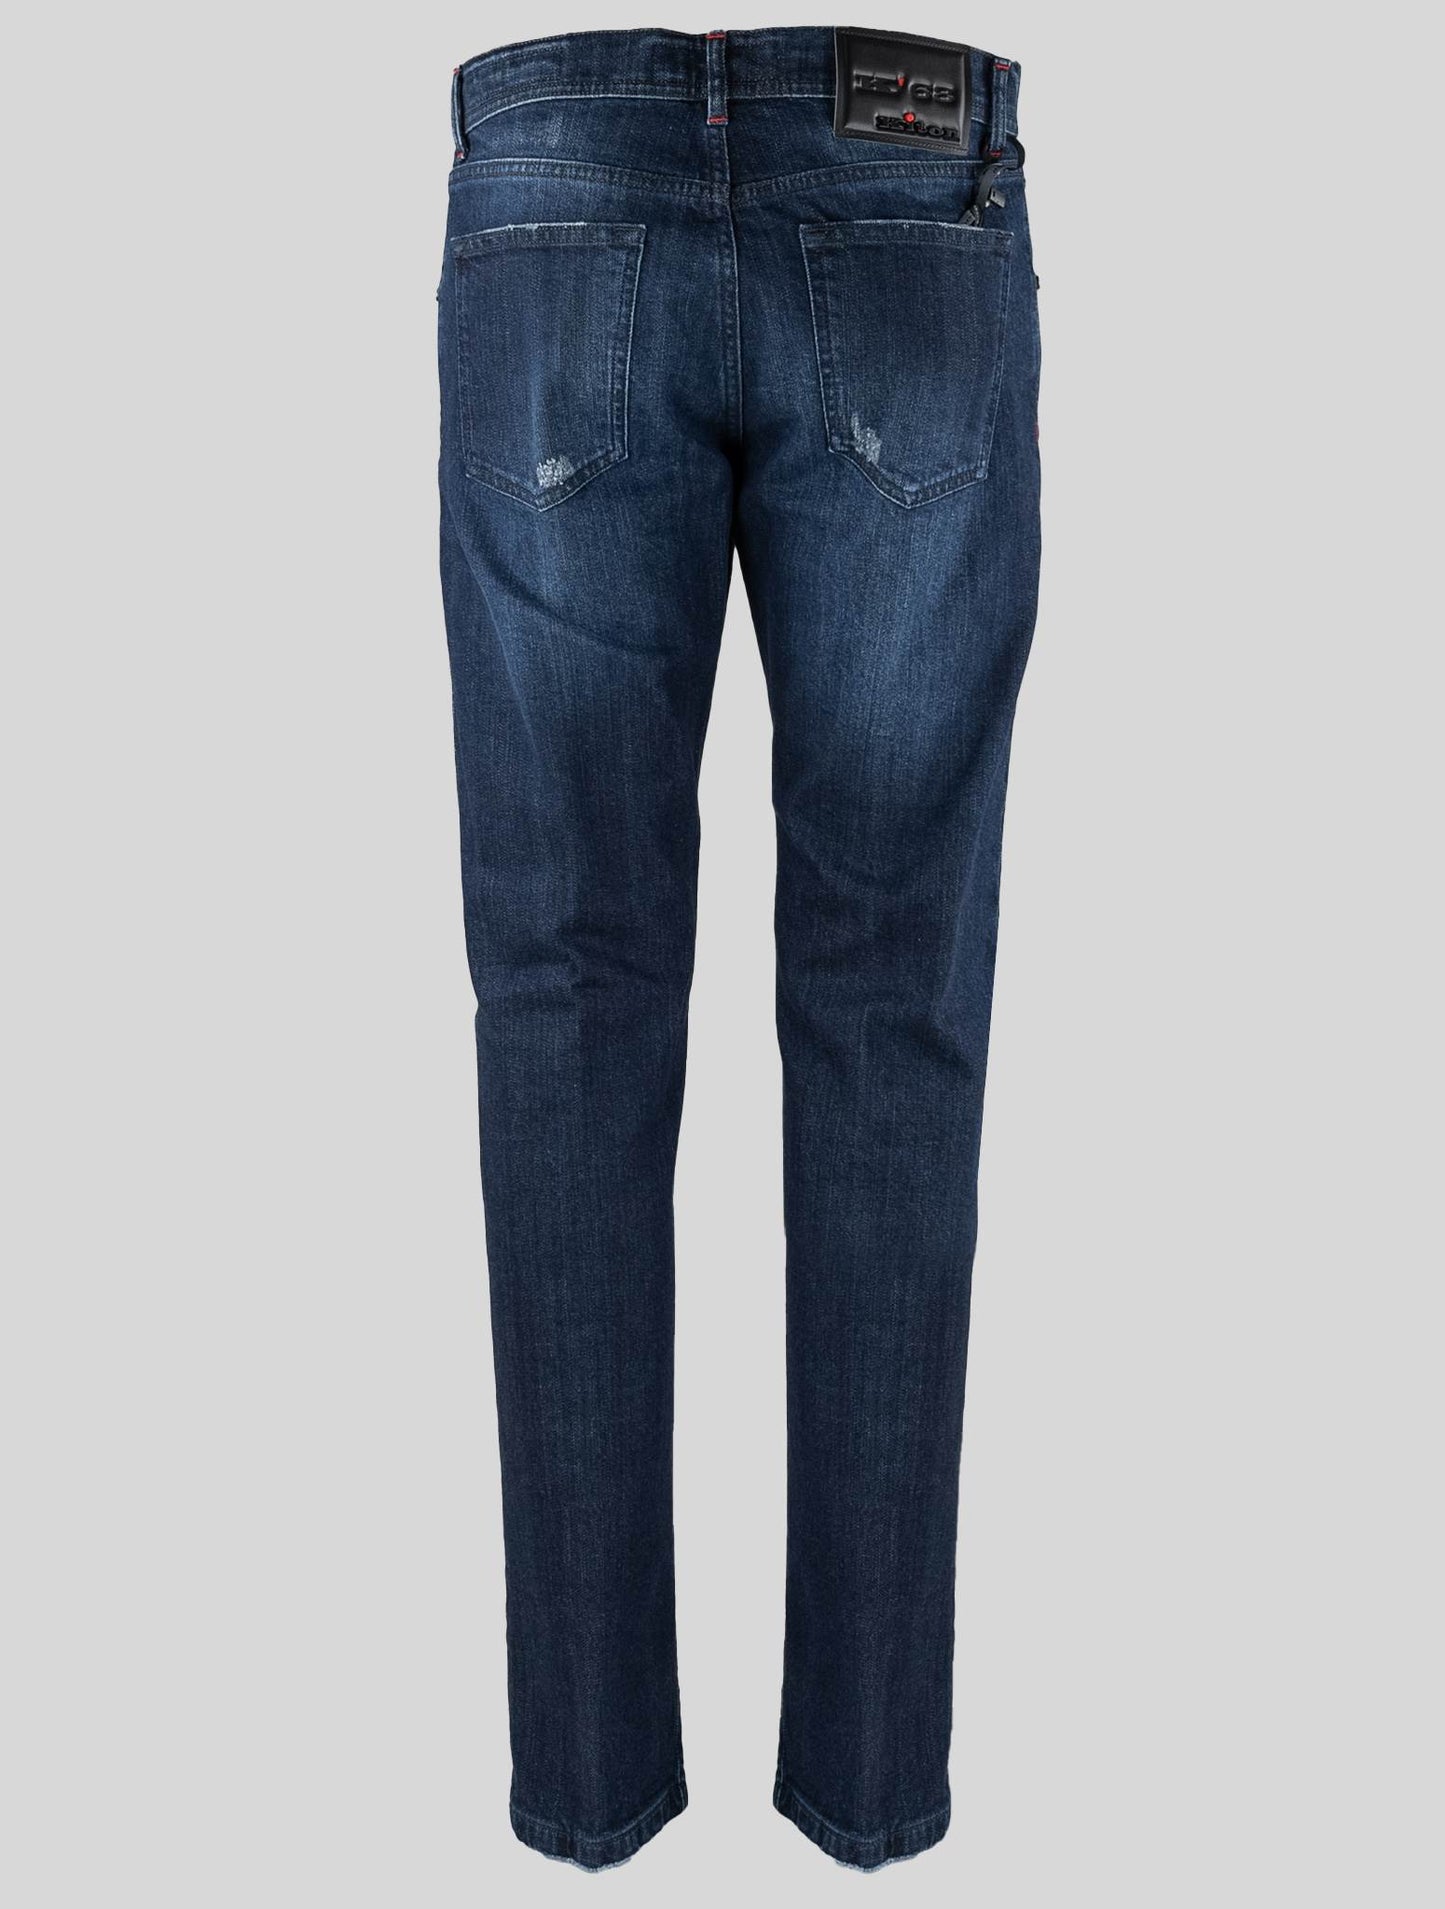 Kiton Blue Cotton Ea Jeans Limited Edition 07 of 22